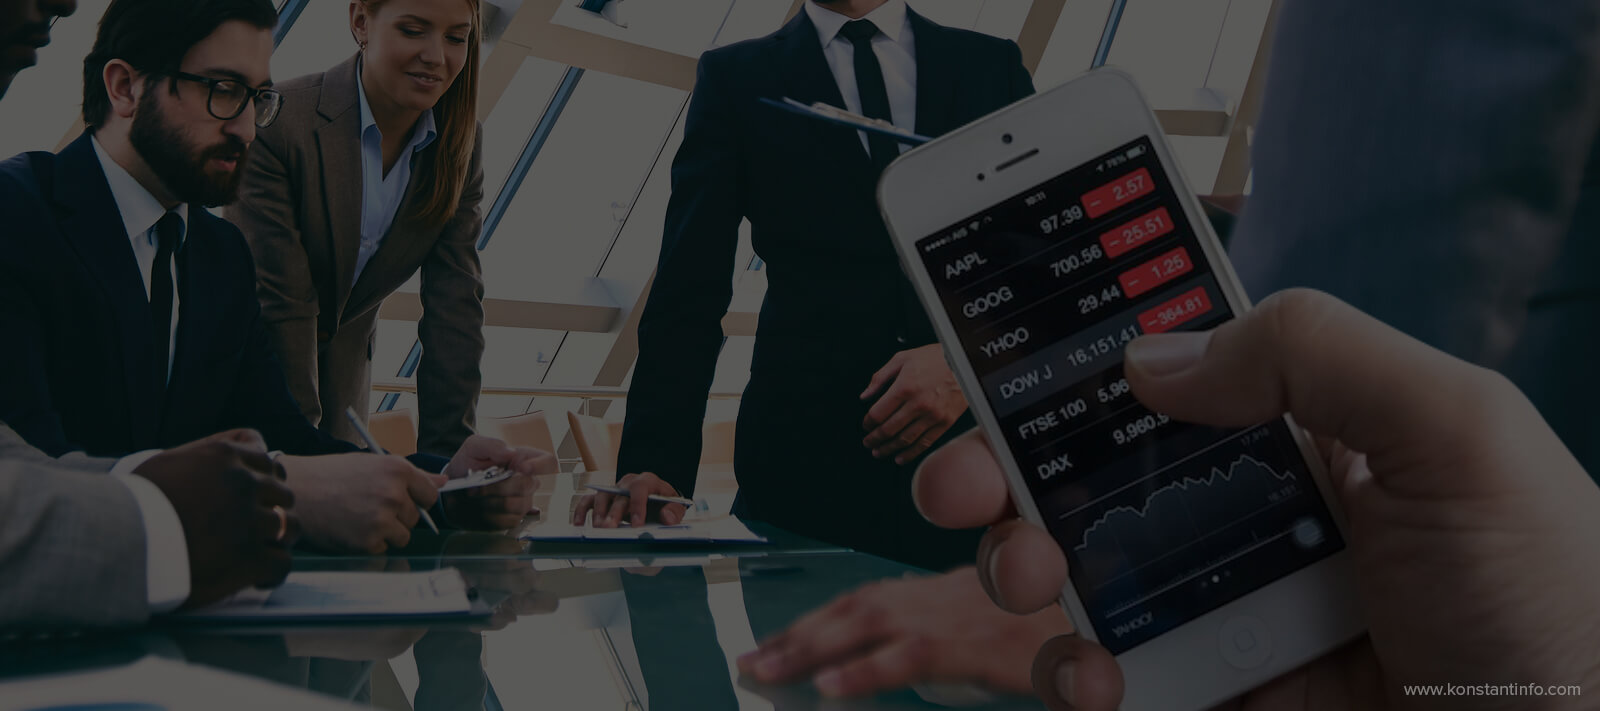 Reasons to Develop a Stock Tracking App for Investors